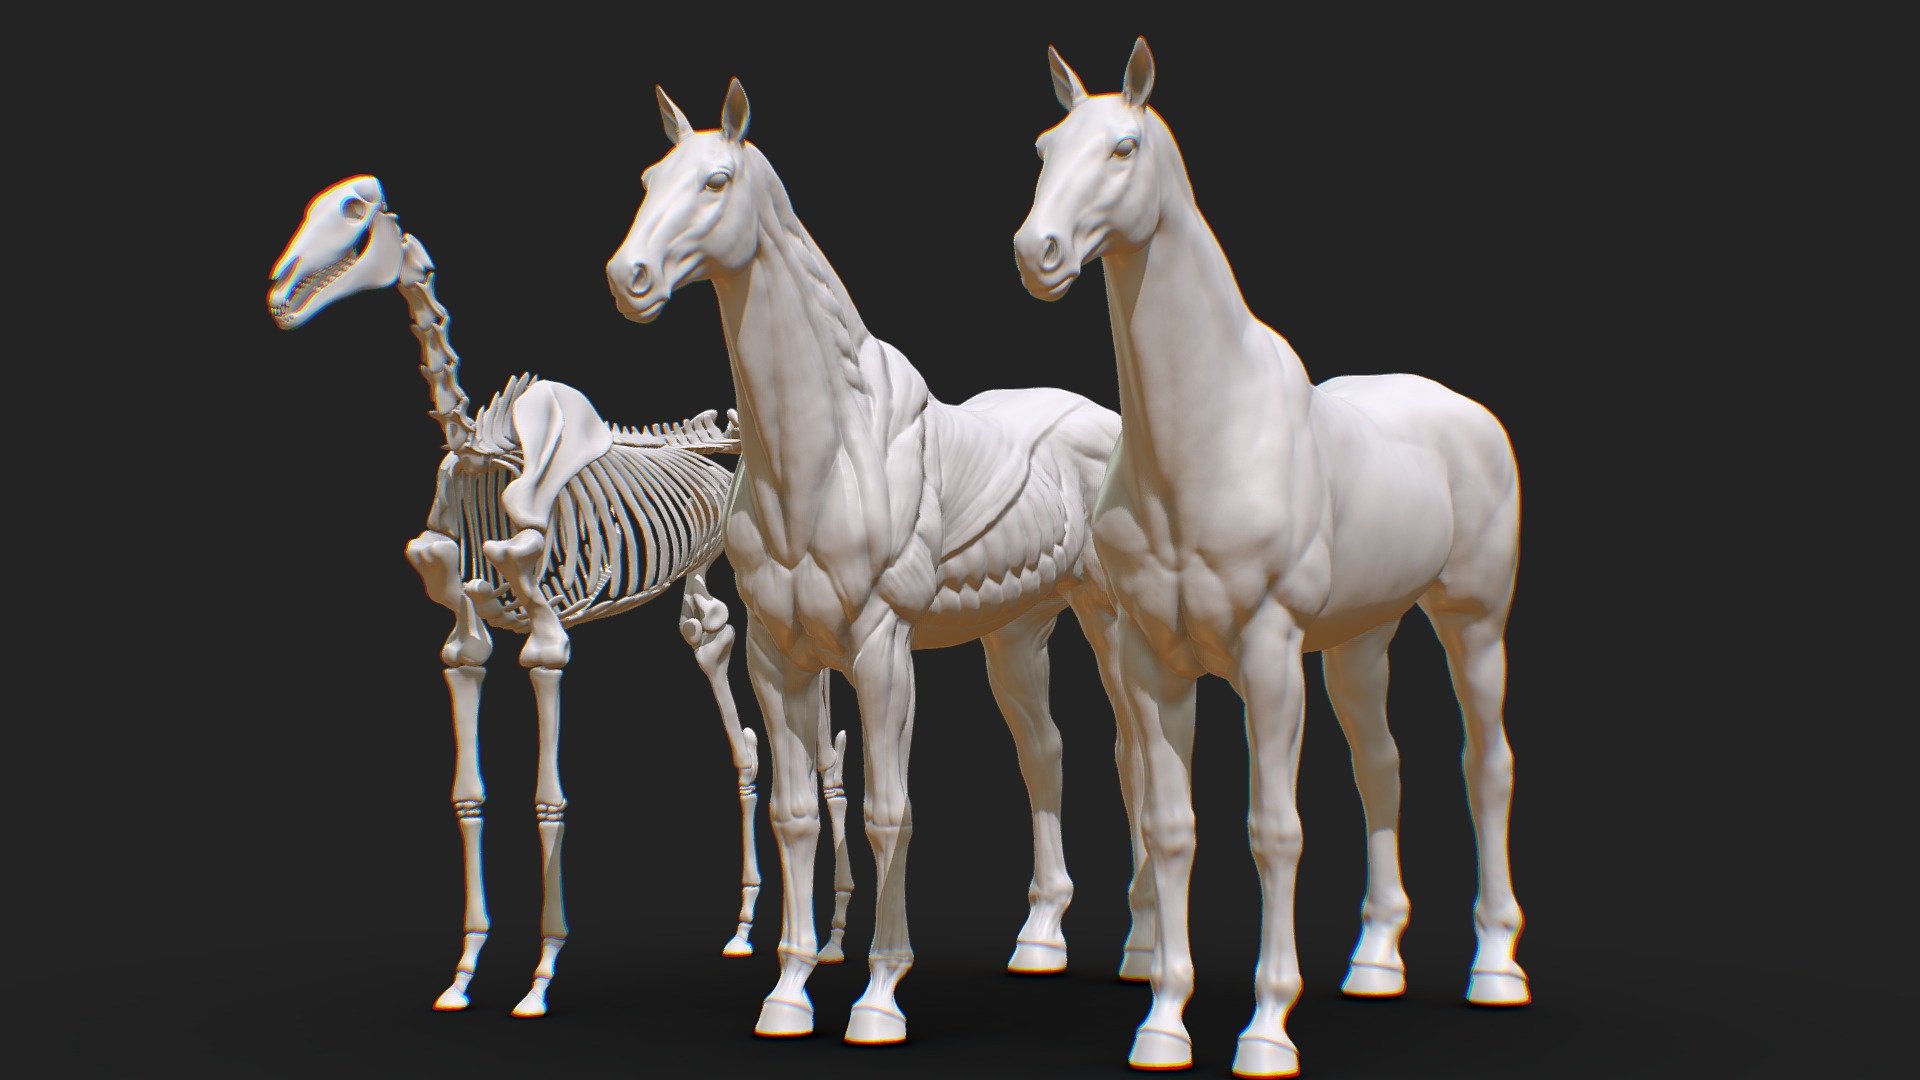 ANIMAL HORSE ANATOMY SKIN ECORCHE (Included High Poly)

General:


This Bundle included 1 horse skin and 1 acorche with eyes
This model was created for easy study horse anatomy
Good Topology for Rigging
Baked map and textures in 4096x4096 resolutions.
Included High Poly

Files Included:


HorseAnatomy.ztl (includes High Poly)
HorseAnatomy.fbx
HorseAnatomy.ma
HorseAnatomy.max
HorseAnatomy.obj
HorseAnatomy.mtl
HorseAnatomy.blend

BakeFiles


HorseAnatomyEcorche_ambient_occlusion.tif
HorseAnatomyEcorche_curvature.tif
HorseAnatomyEcorche_normal_base.tif
HorseAnatomyEcorche_position.tif
HorseAnatomyEcorche_thickness.tif

HorseAnatomyEcorche_world_space_normals.tif



HorseAnatomySkin_ambient_occlusion.tif


HorseAnatomySkin_curvature.tif
HorseAnatomySkin_normal_base.tif
HorseAnatomySkin_position.tif
HorseAnatomySkin_thickness.tif
HorseAnatomySkin_world_space_normals.tif
 - Animal Horse Anatomy Skin Ecoche - 3D model by cuteocg 3d model